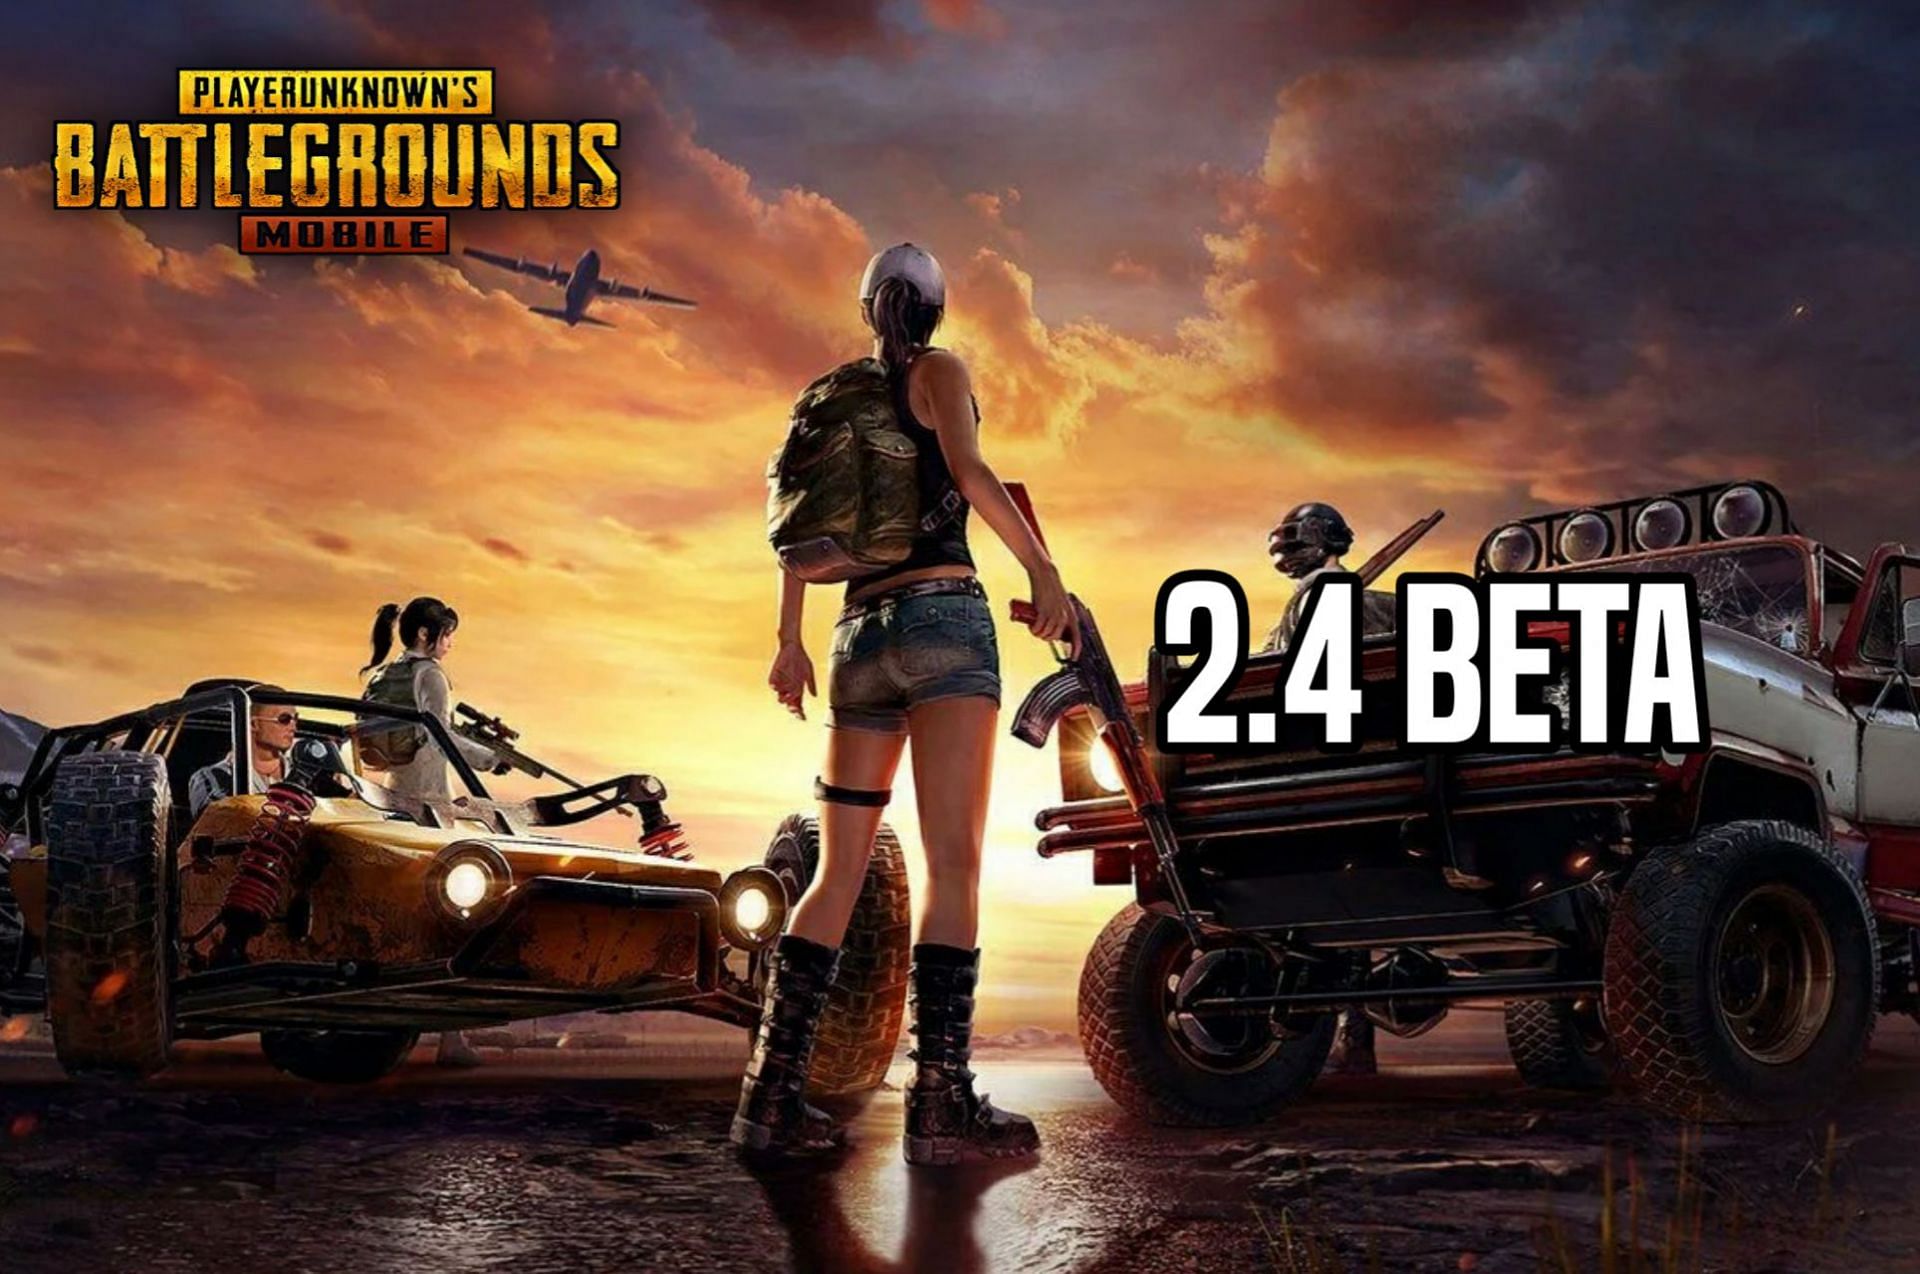 2.4 beta of the PUBG Mobile is now out (Image via Sportskeeda)